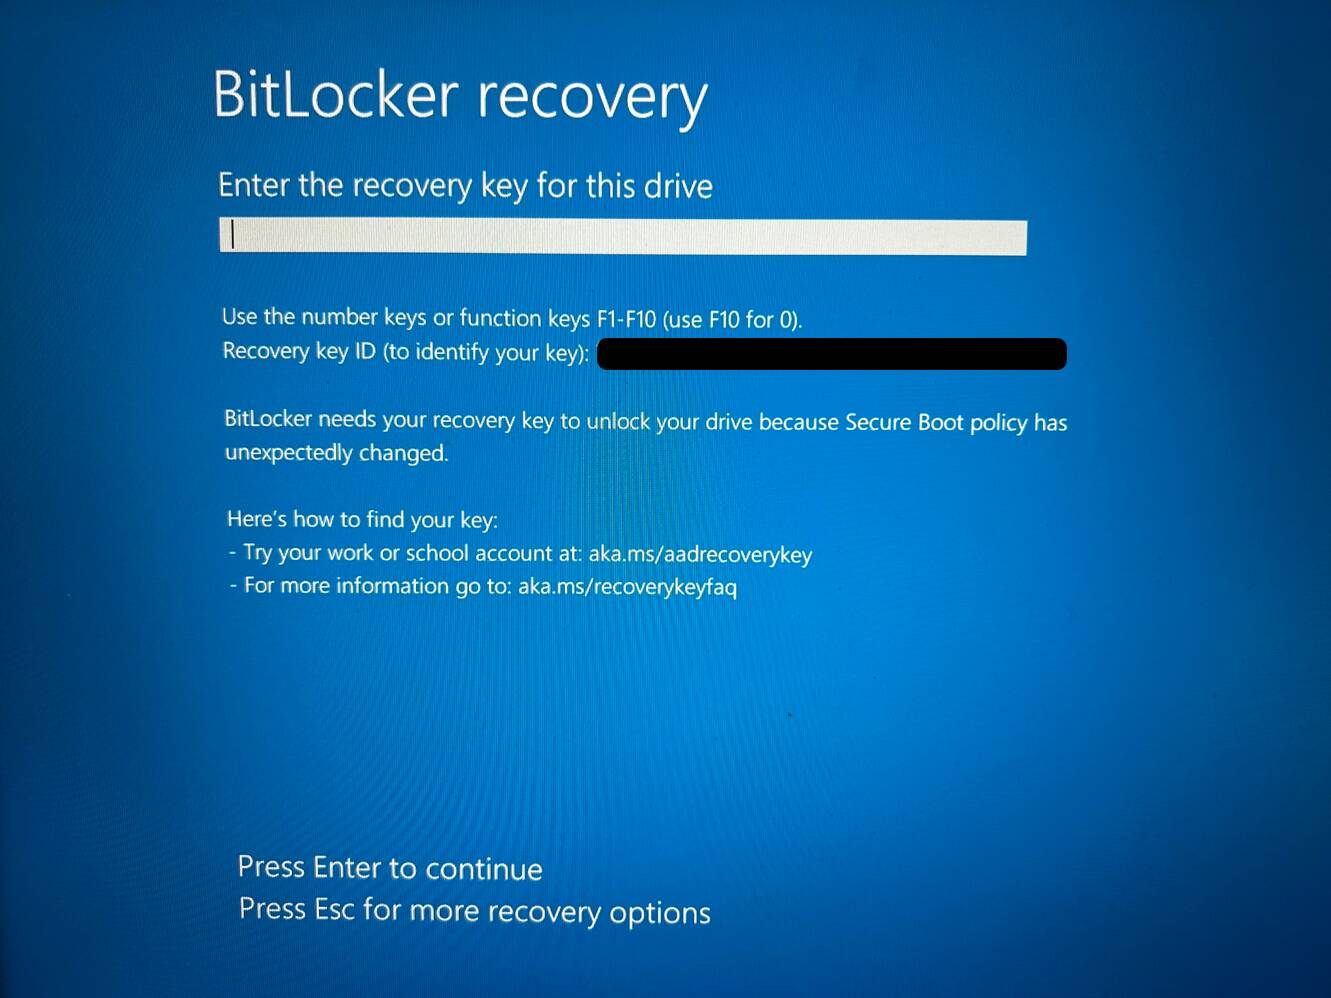 Turns into Exercise Fertile Microsoft Secure Boot fix sends PCs into BitLocker Recovery • The Register